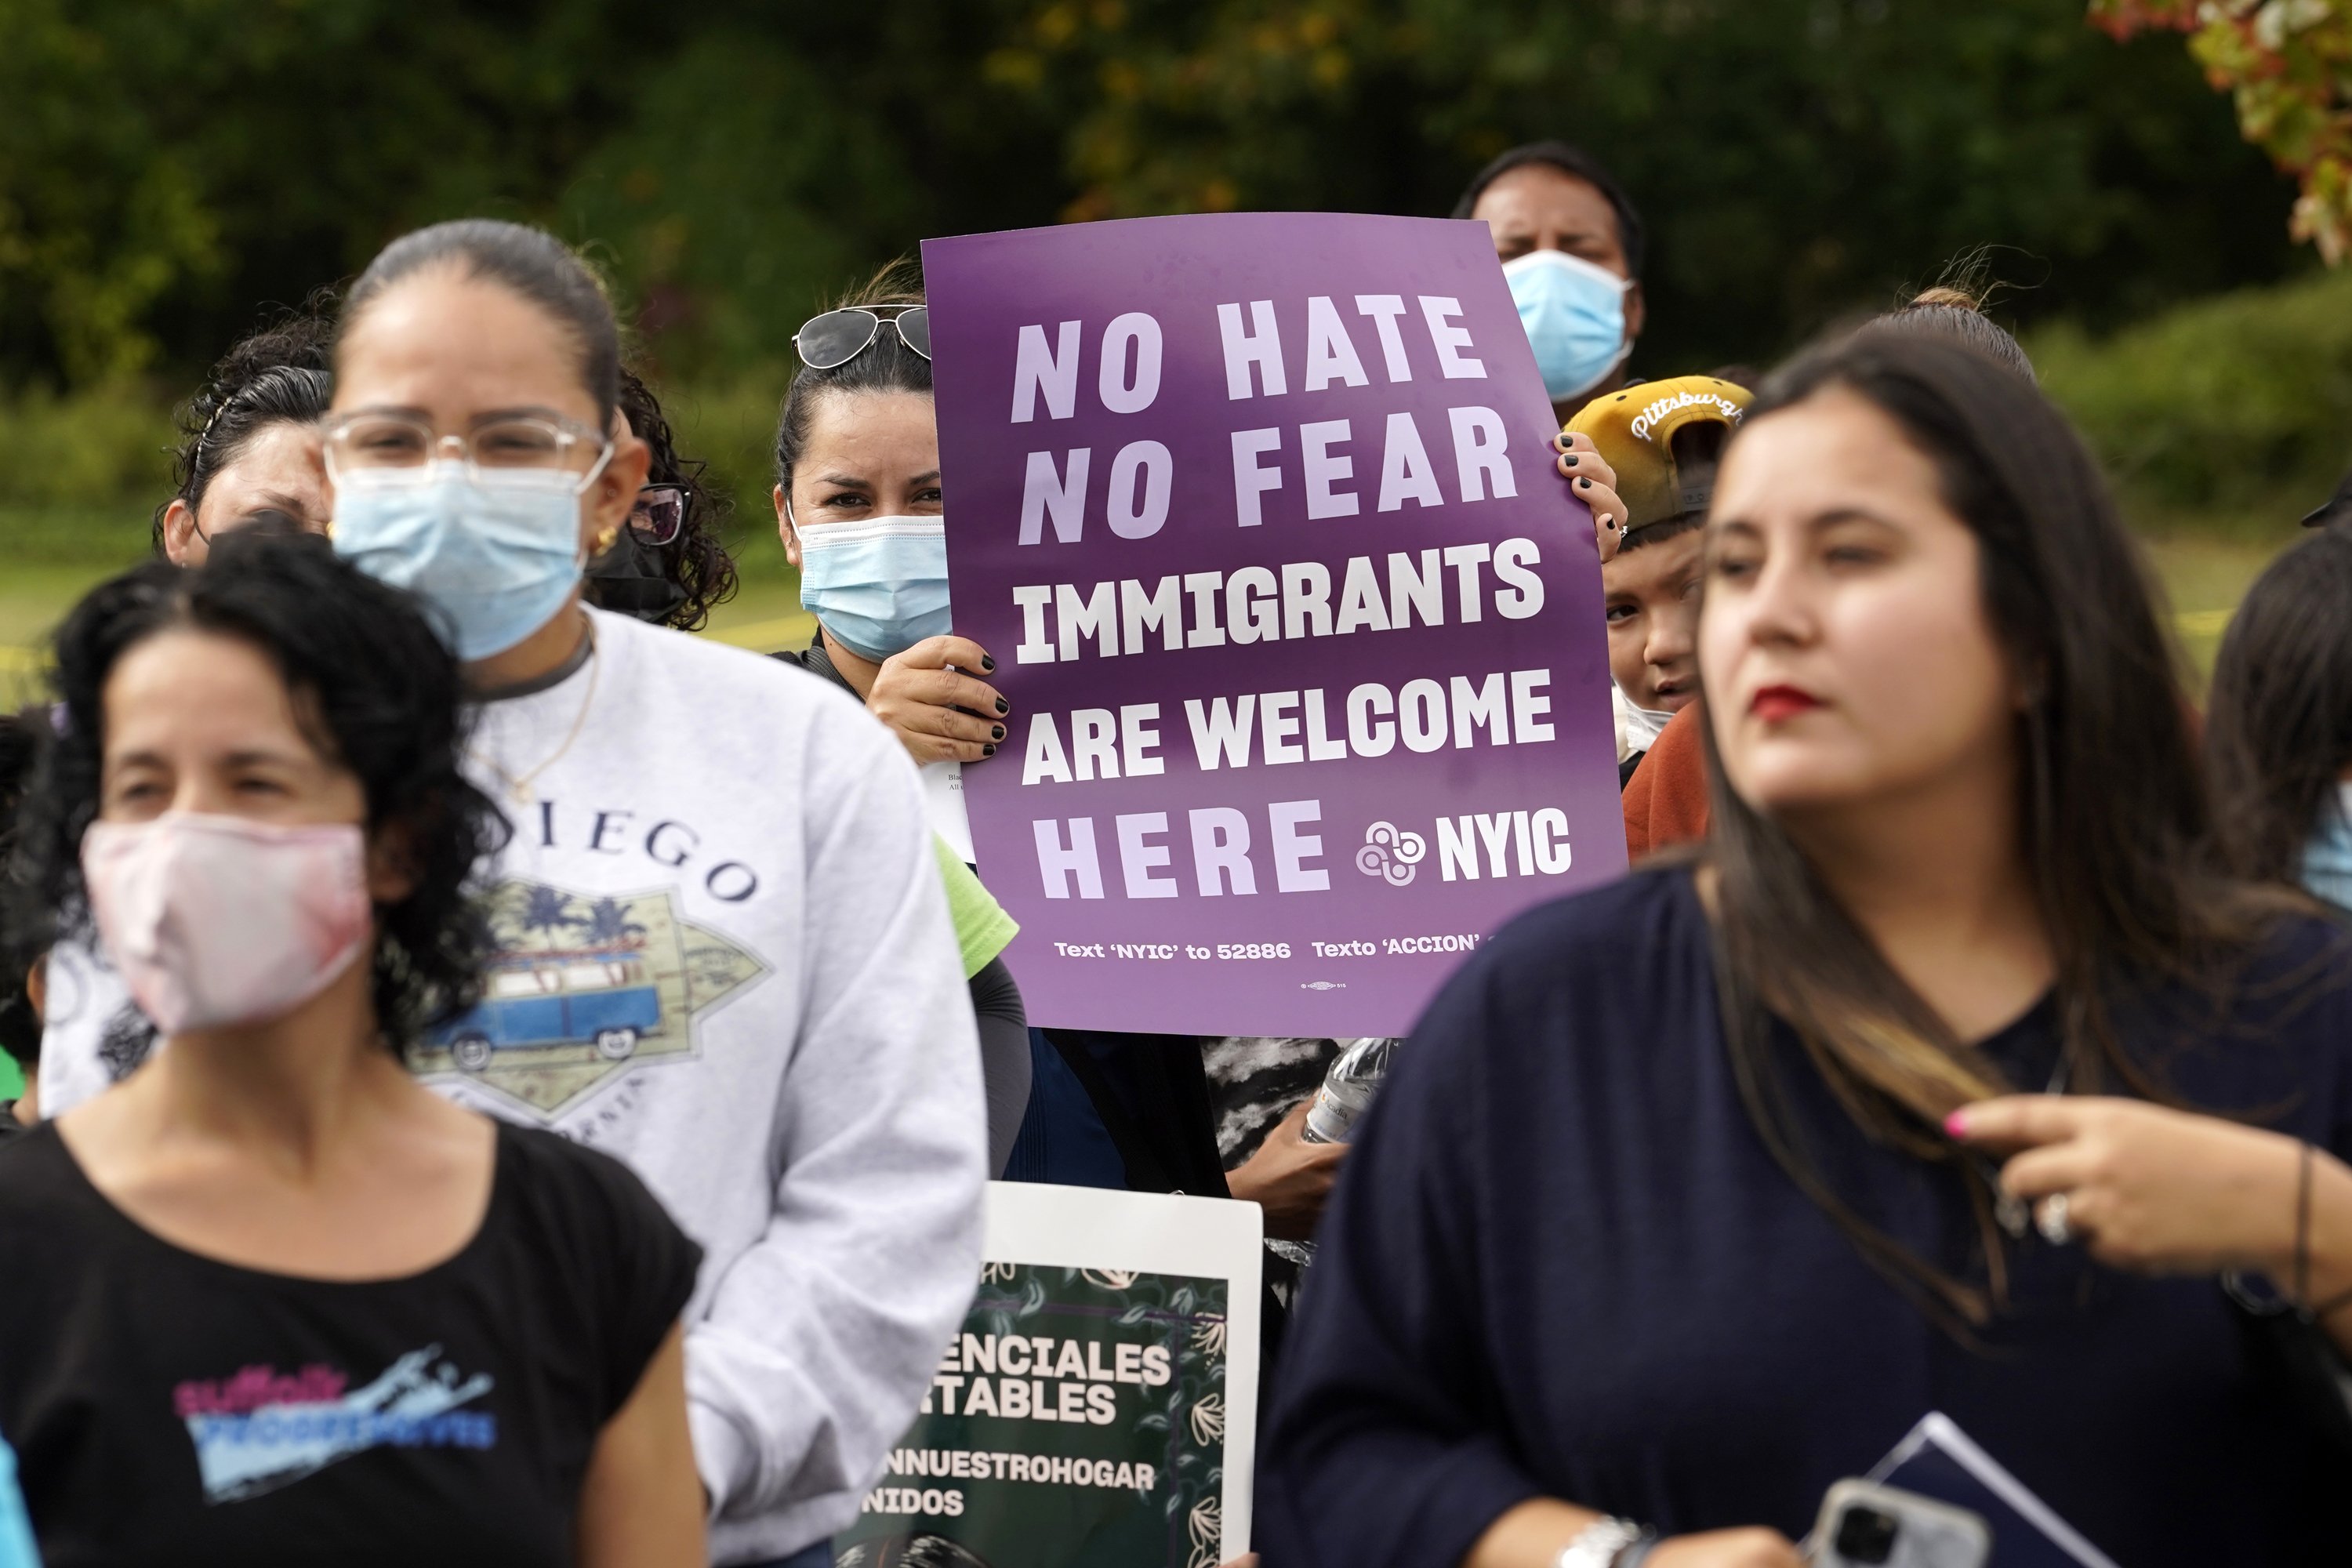 A woman holds a sign during a march and rally in support of immigration reform Oct. 16, 2021. (CNS photo/Gregory A. Shemitz)